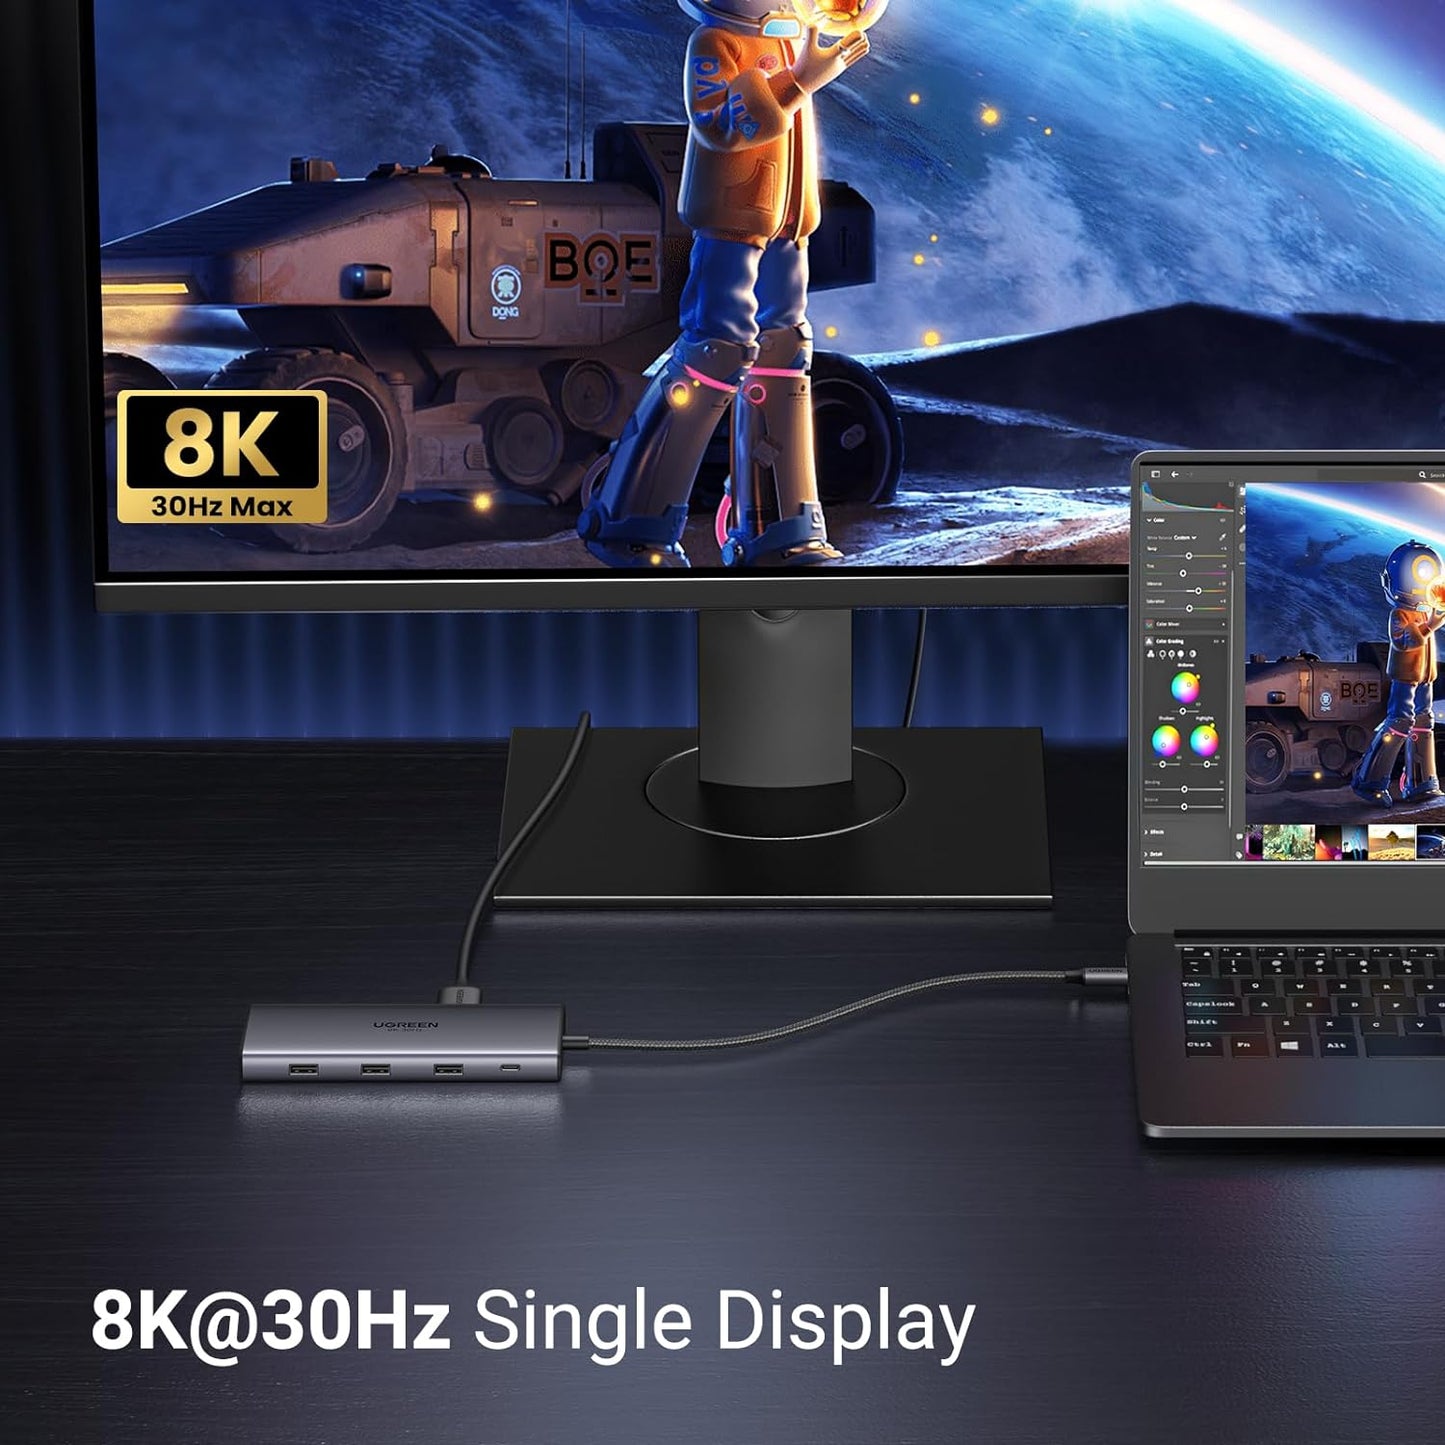 UGREEN Revodok Pro 210 Laptop Docking Station 10 in 1 USB C Dock Dual HDMI 4K@60Hz Single 8K@30Hz USB A and USB C Data Port 100W PD 1Gbps Ethernet, SD/TF Card Reader for Dell XPS Thinkpad